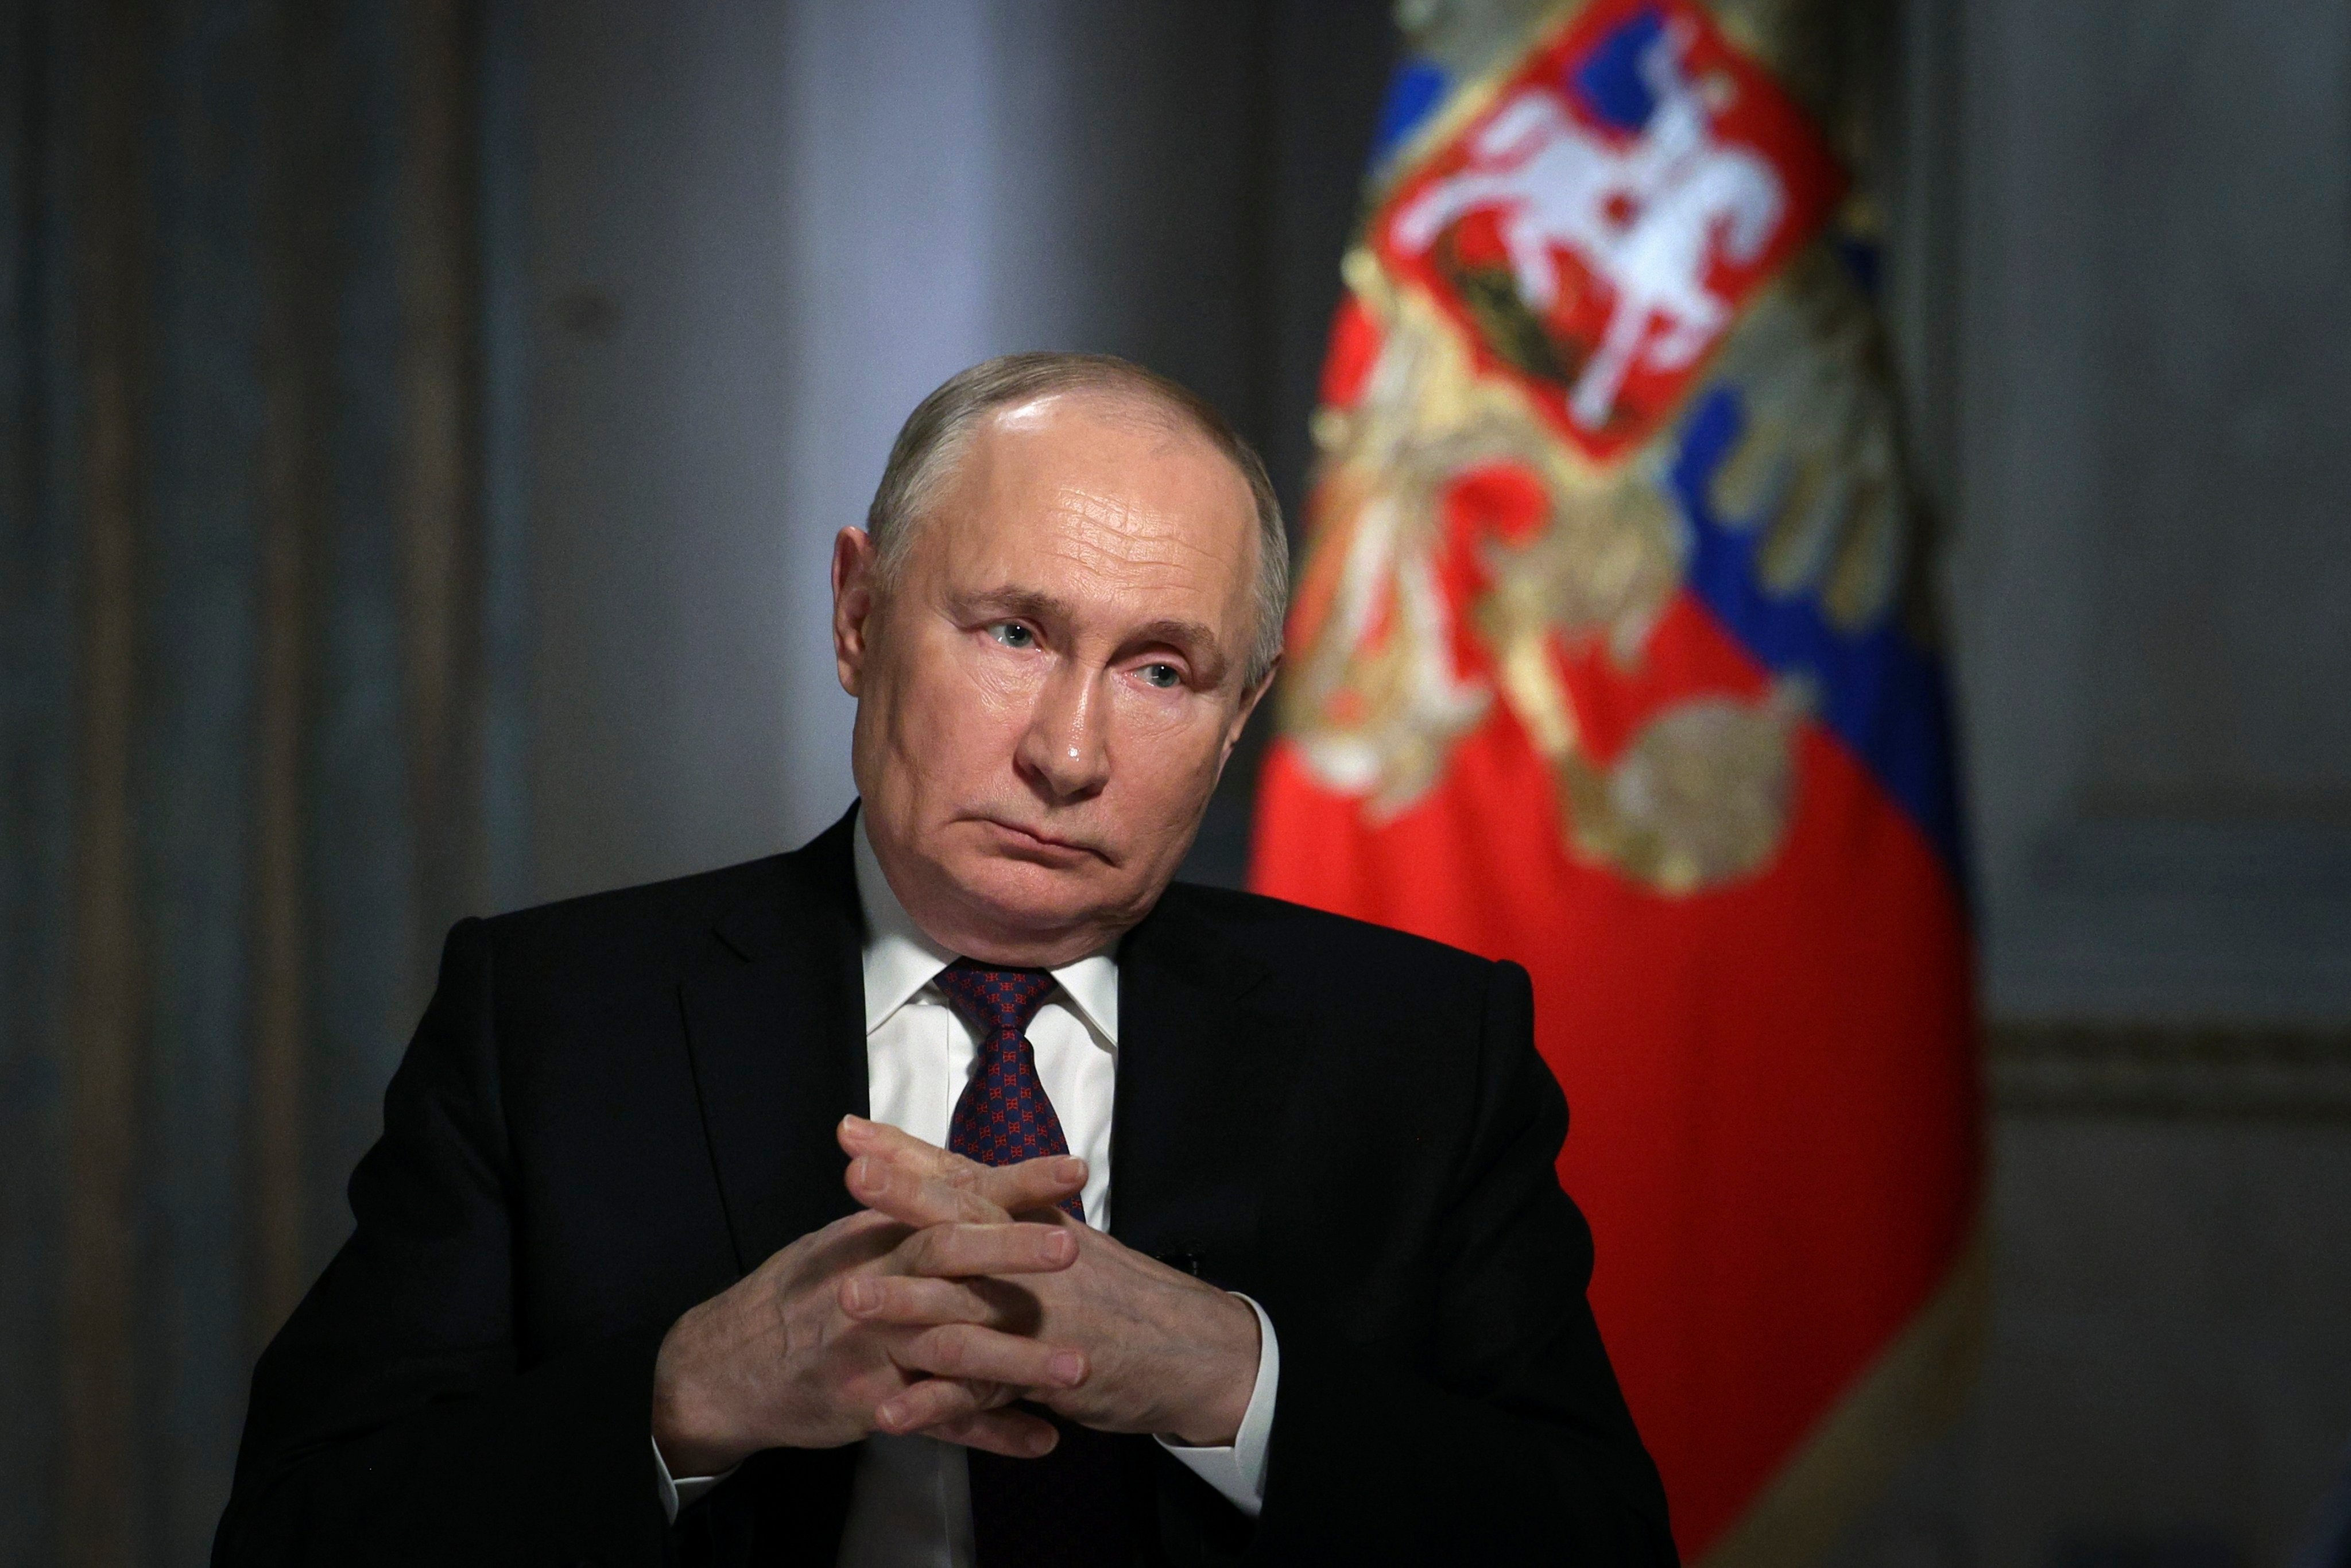 Russian President Vladimir Putin in an interview in Moscow. Putin made his comments ahead of the March 15-17 presidential election that he is certain to win for another six years in power. Photo: AP